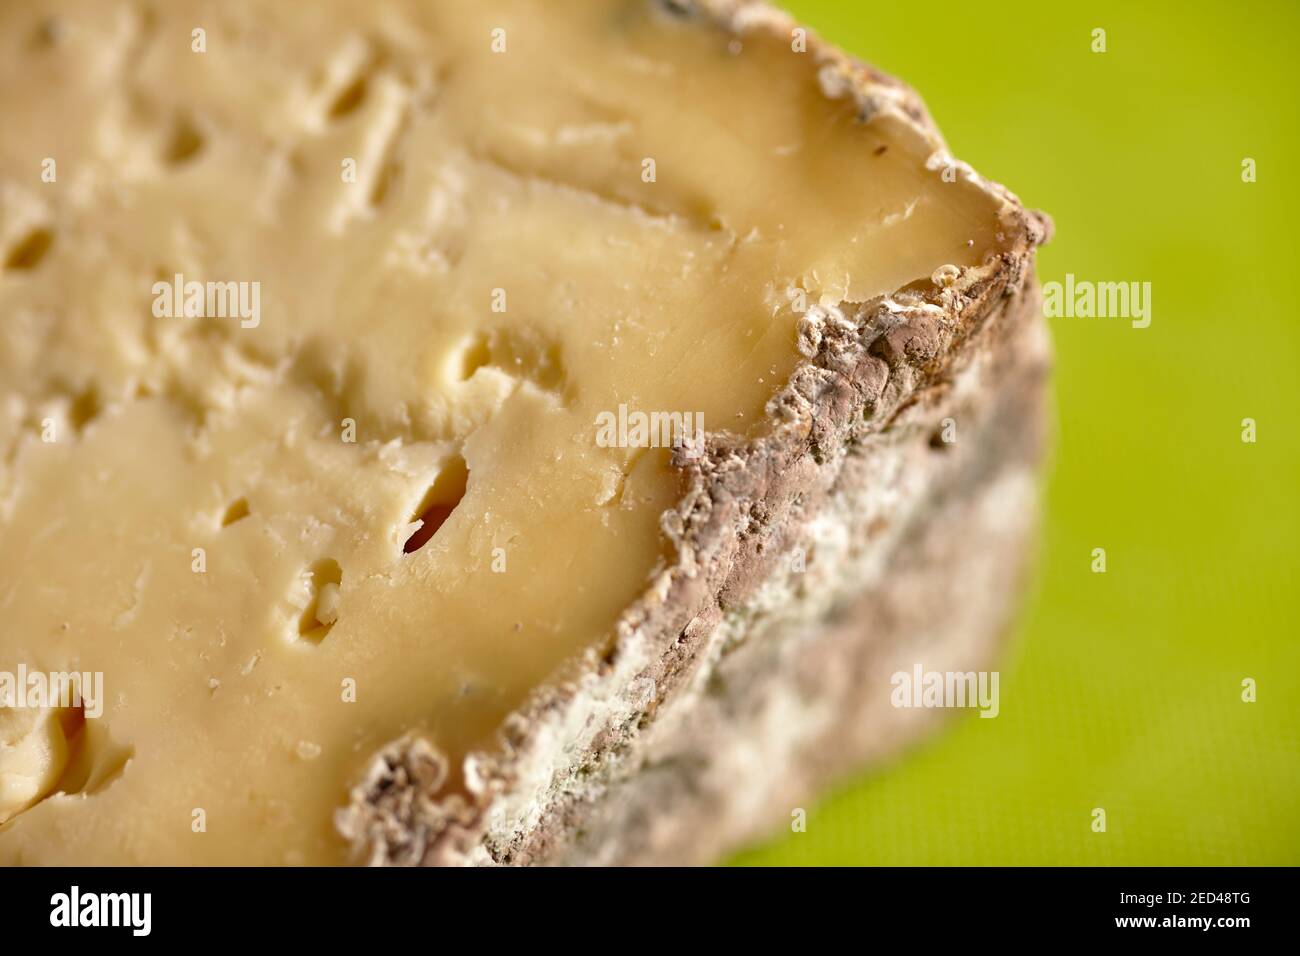 An aged Tomme cheese from Pennsylvania, USA Stock Photo